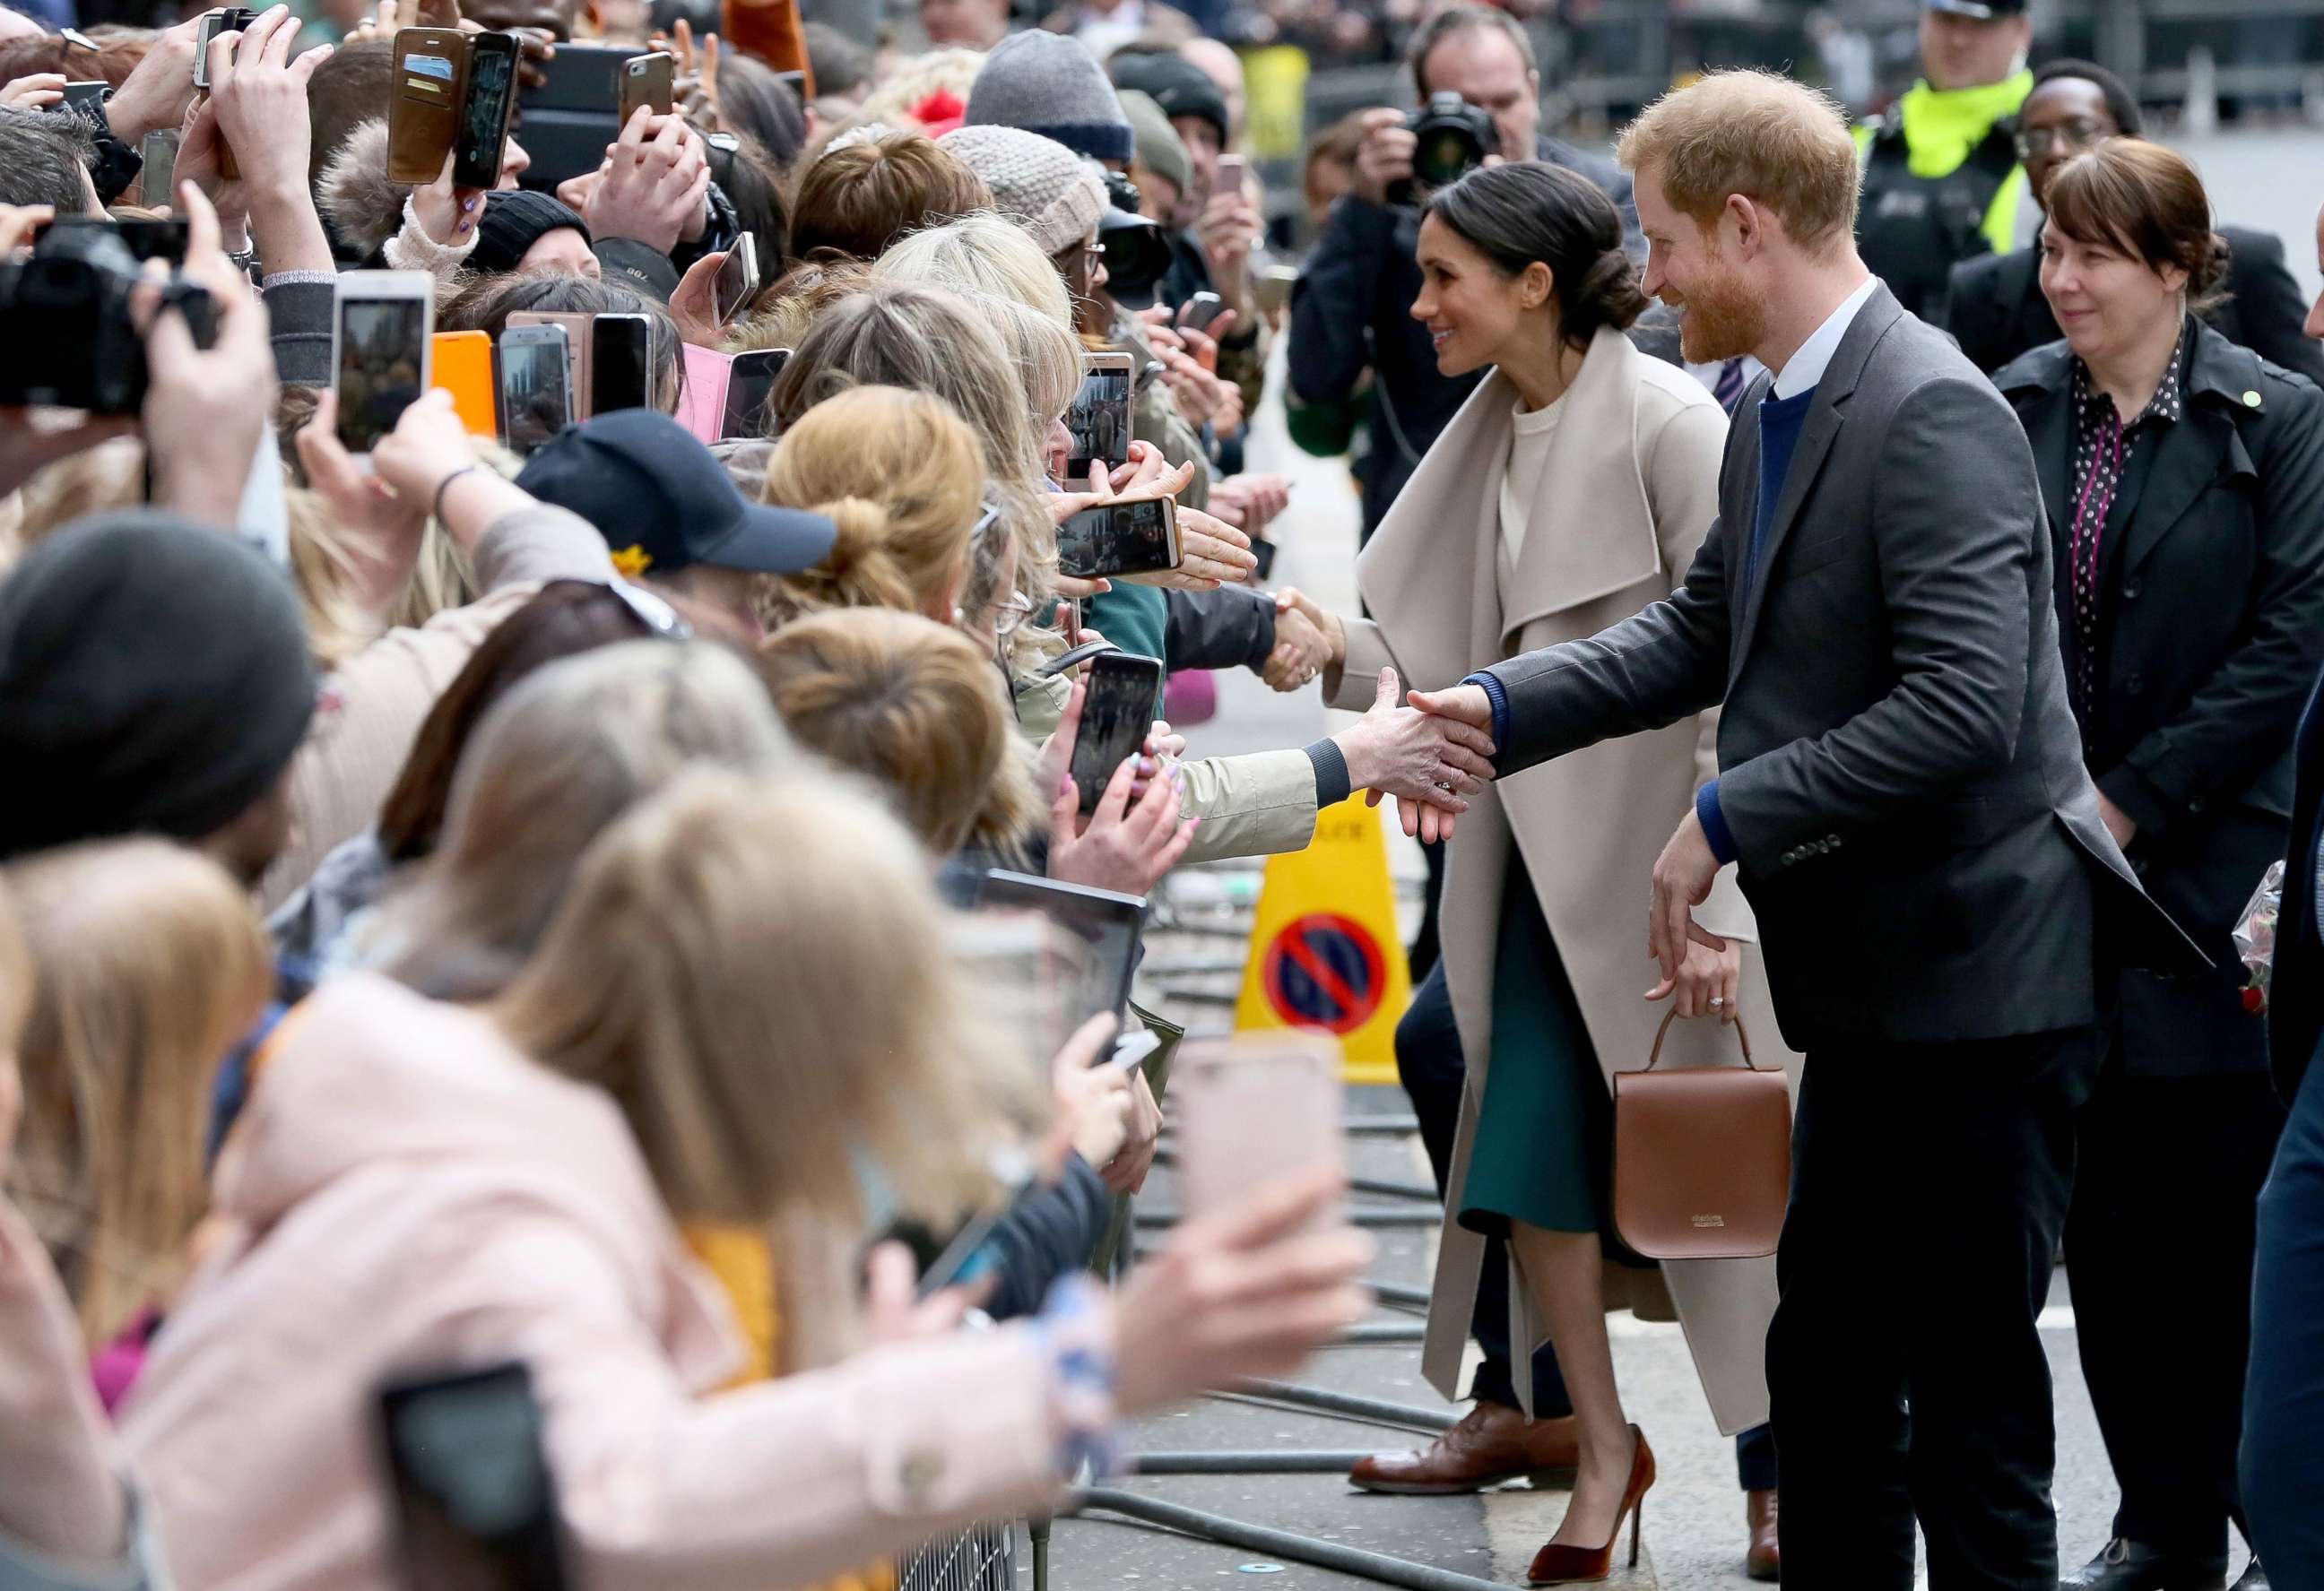 PHOTO: Britain's Prince Harry and Meghan Markle, greet well-wishers after a visit at the historic building, The Crown Liquor Saloon in Belfast, March 23, 2018, where they will learn of the pub's heritage from members of the National Trust.